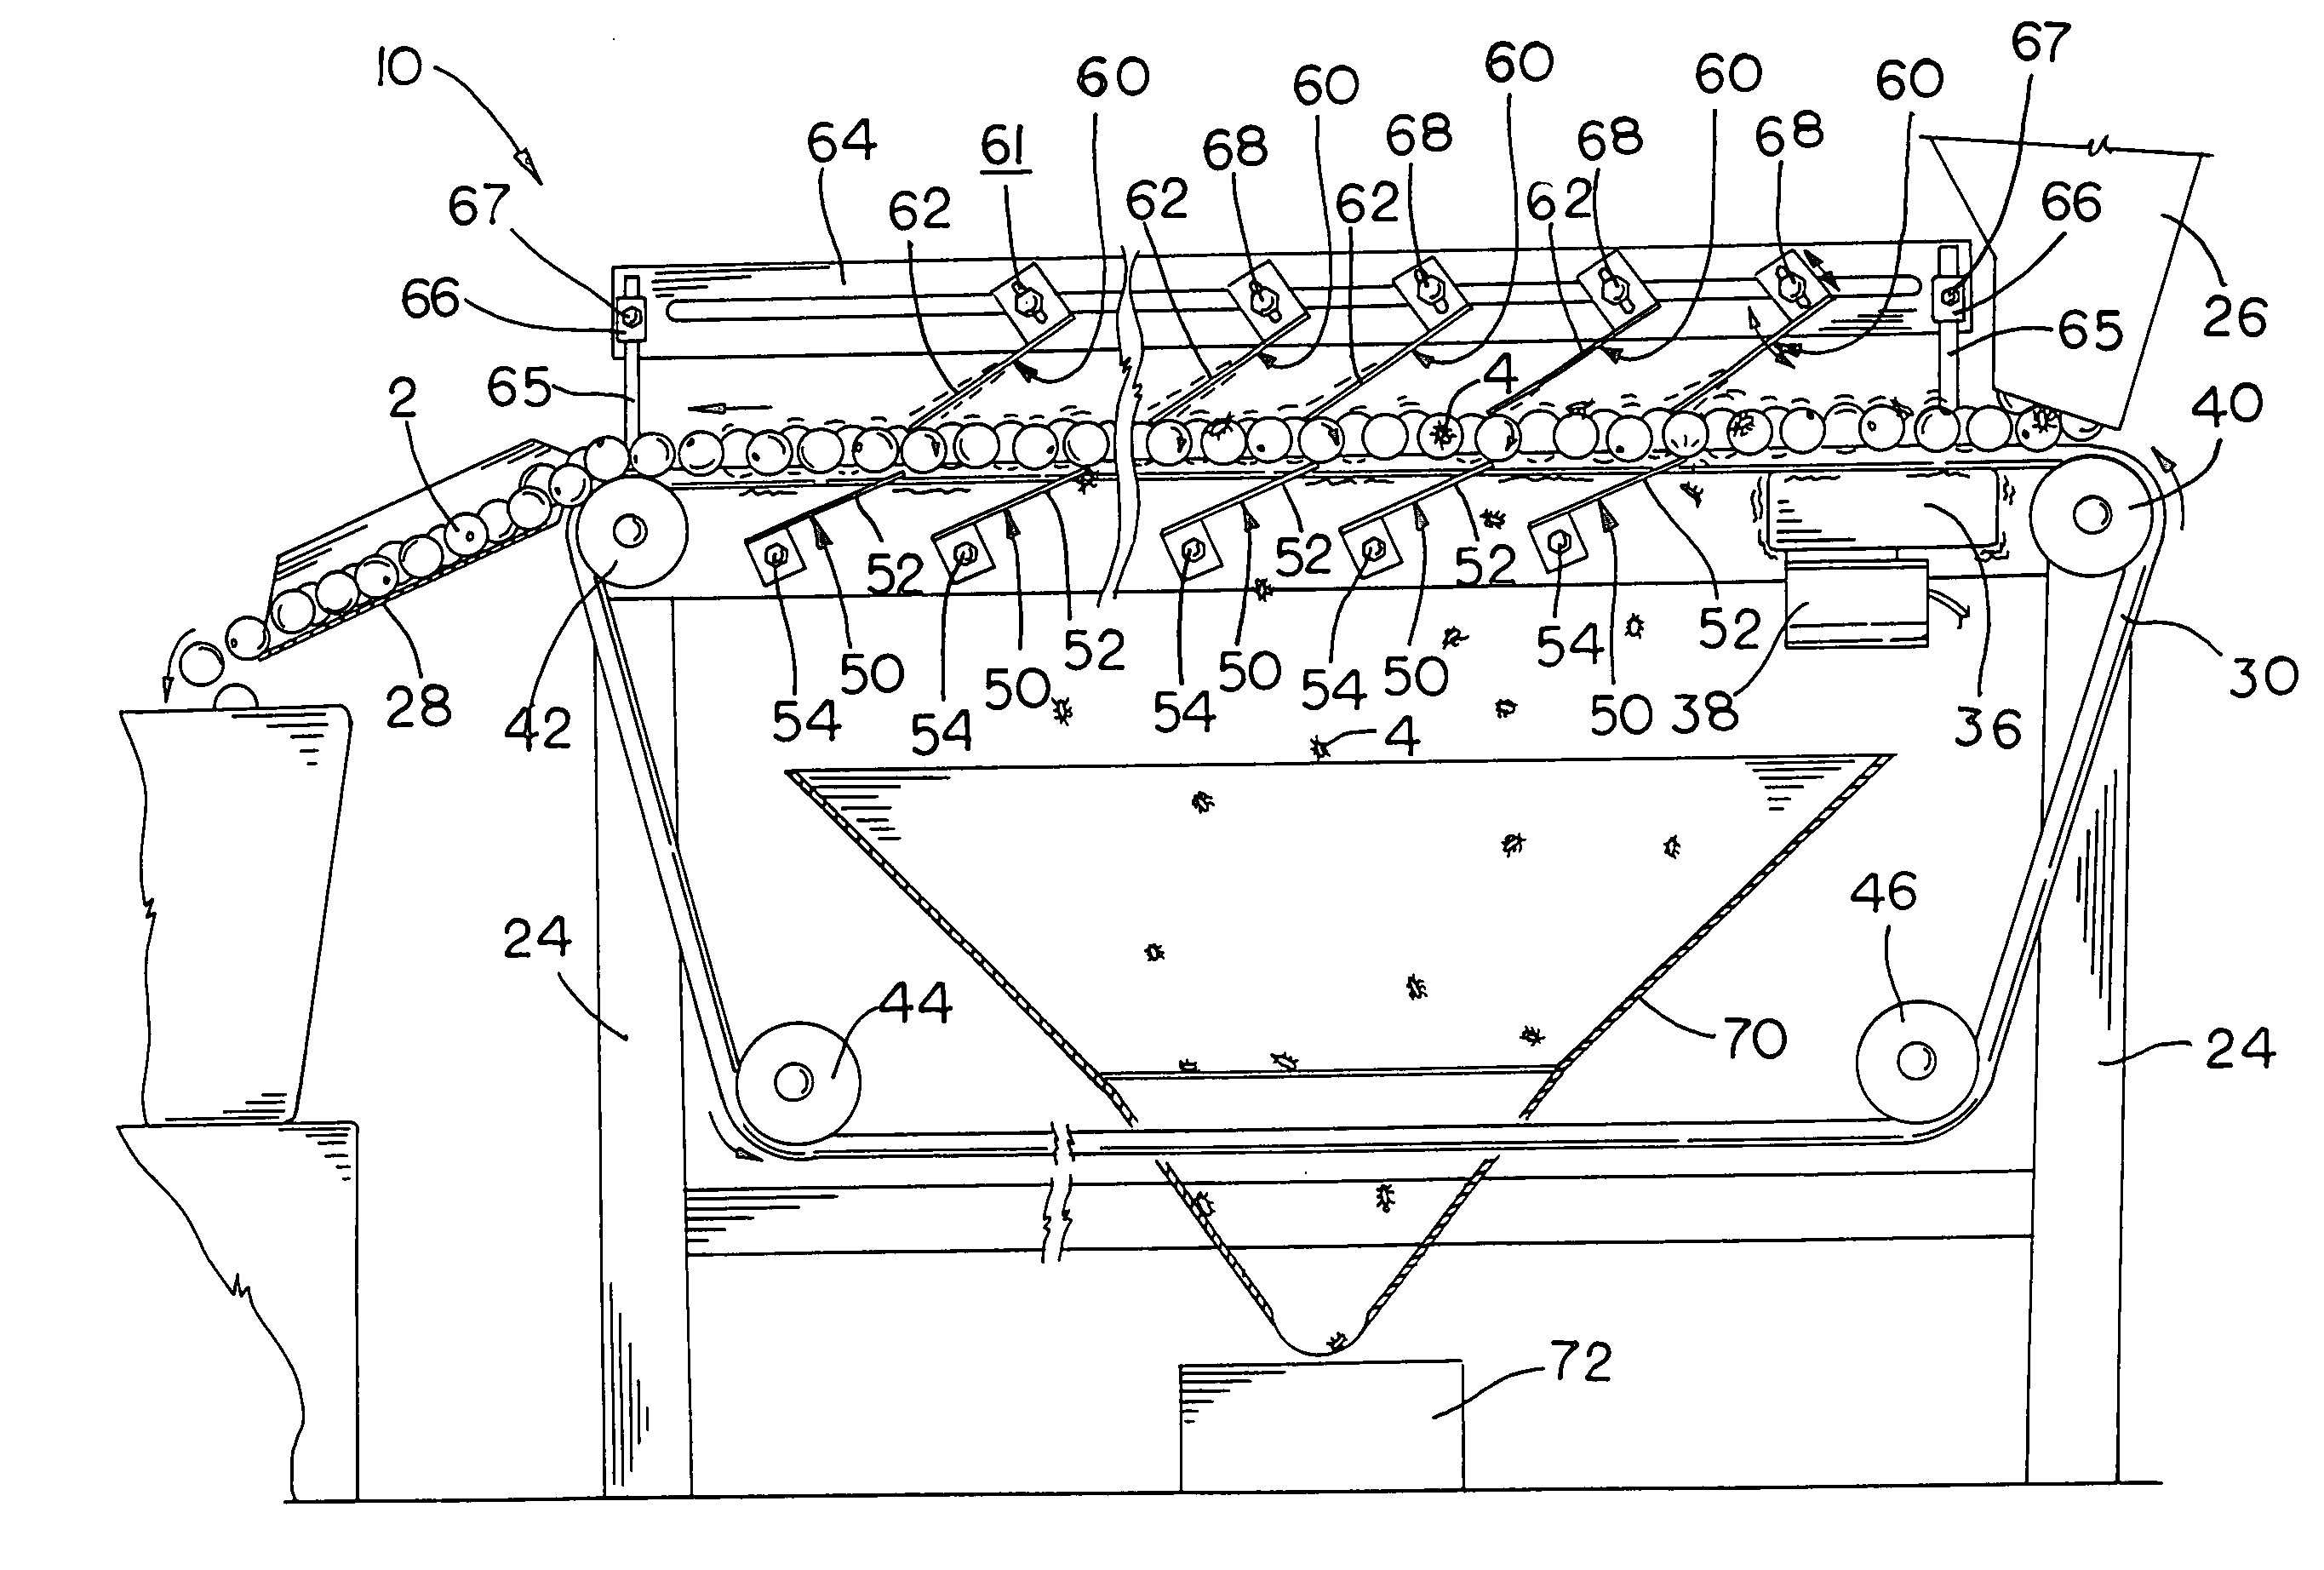 Apparatus for removing insects from produce